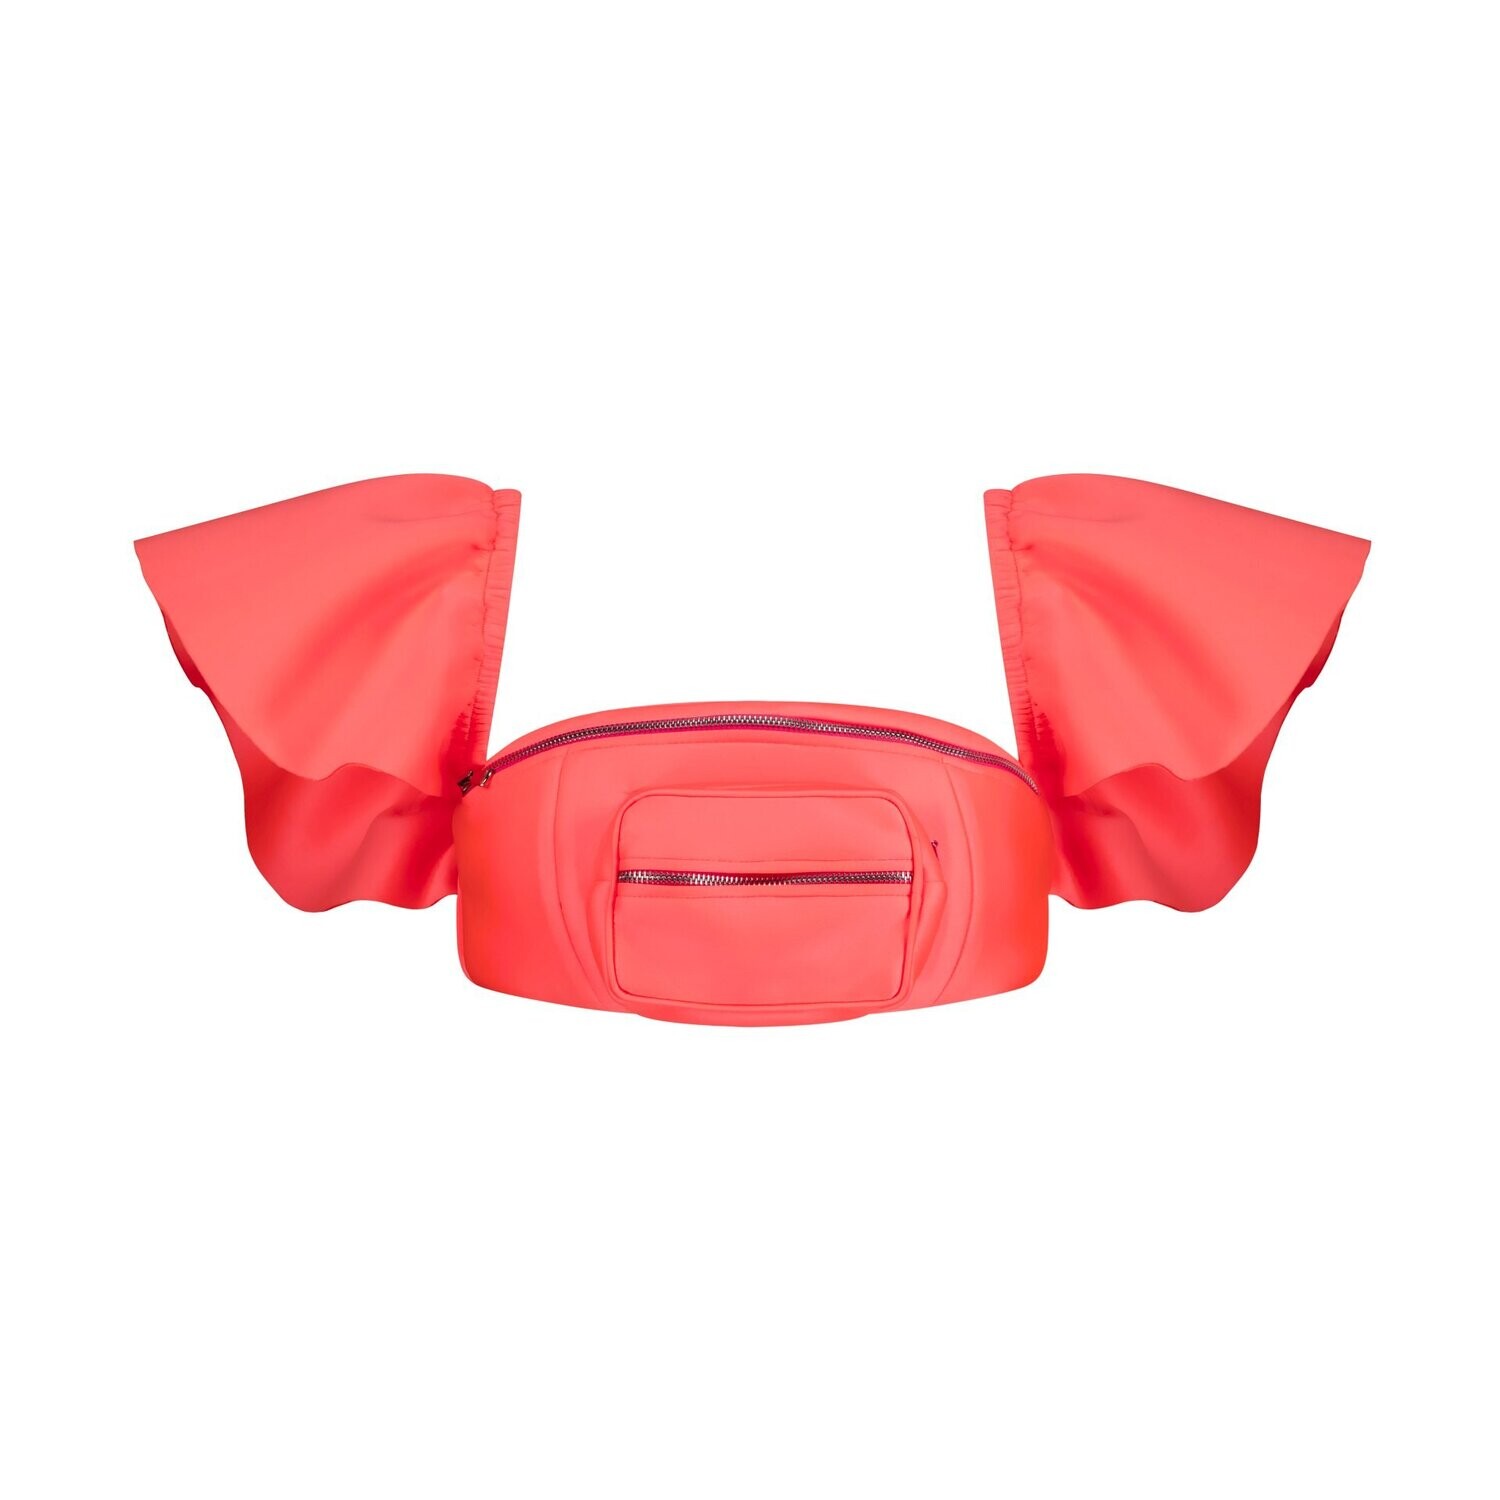 Fanny Pack | Fanny Pack Crop Top By Amber